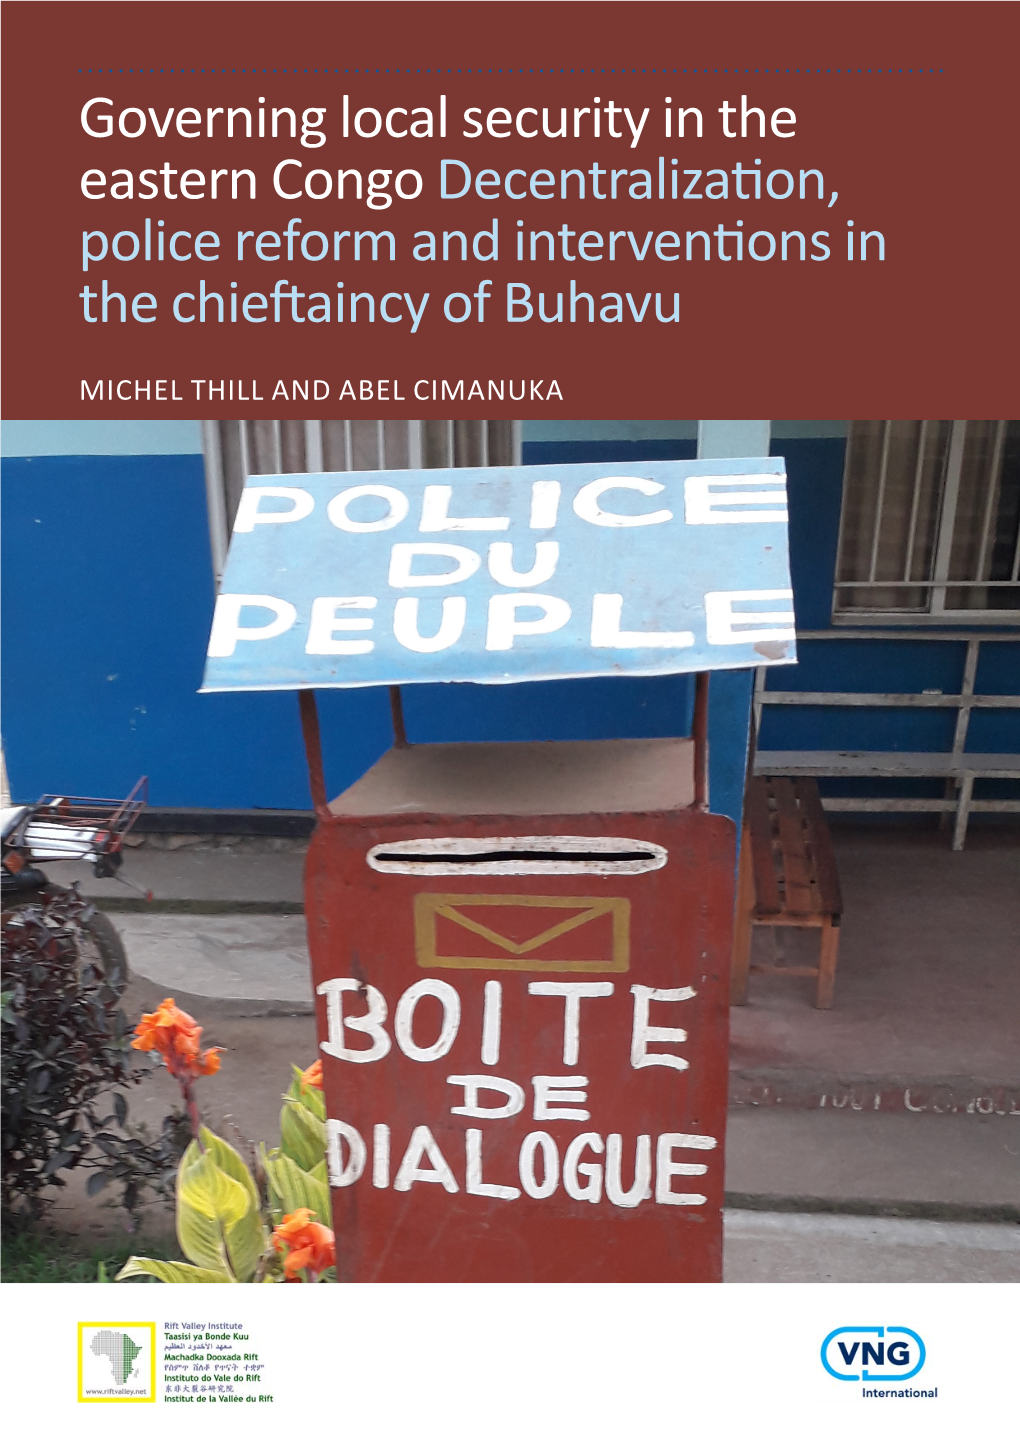 Governing Local Security in the Eastern Congo by Michel Thill and Abel Cimanuka